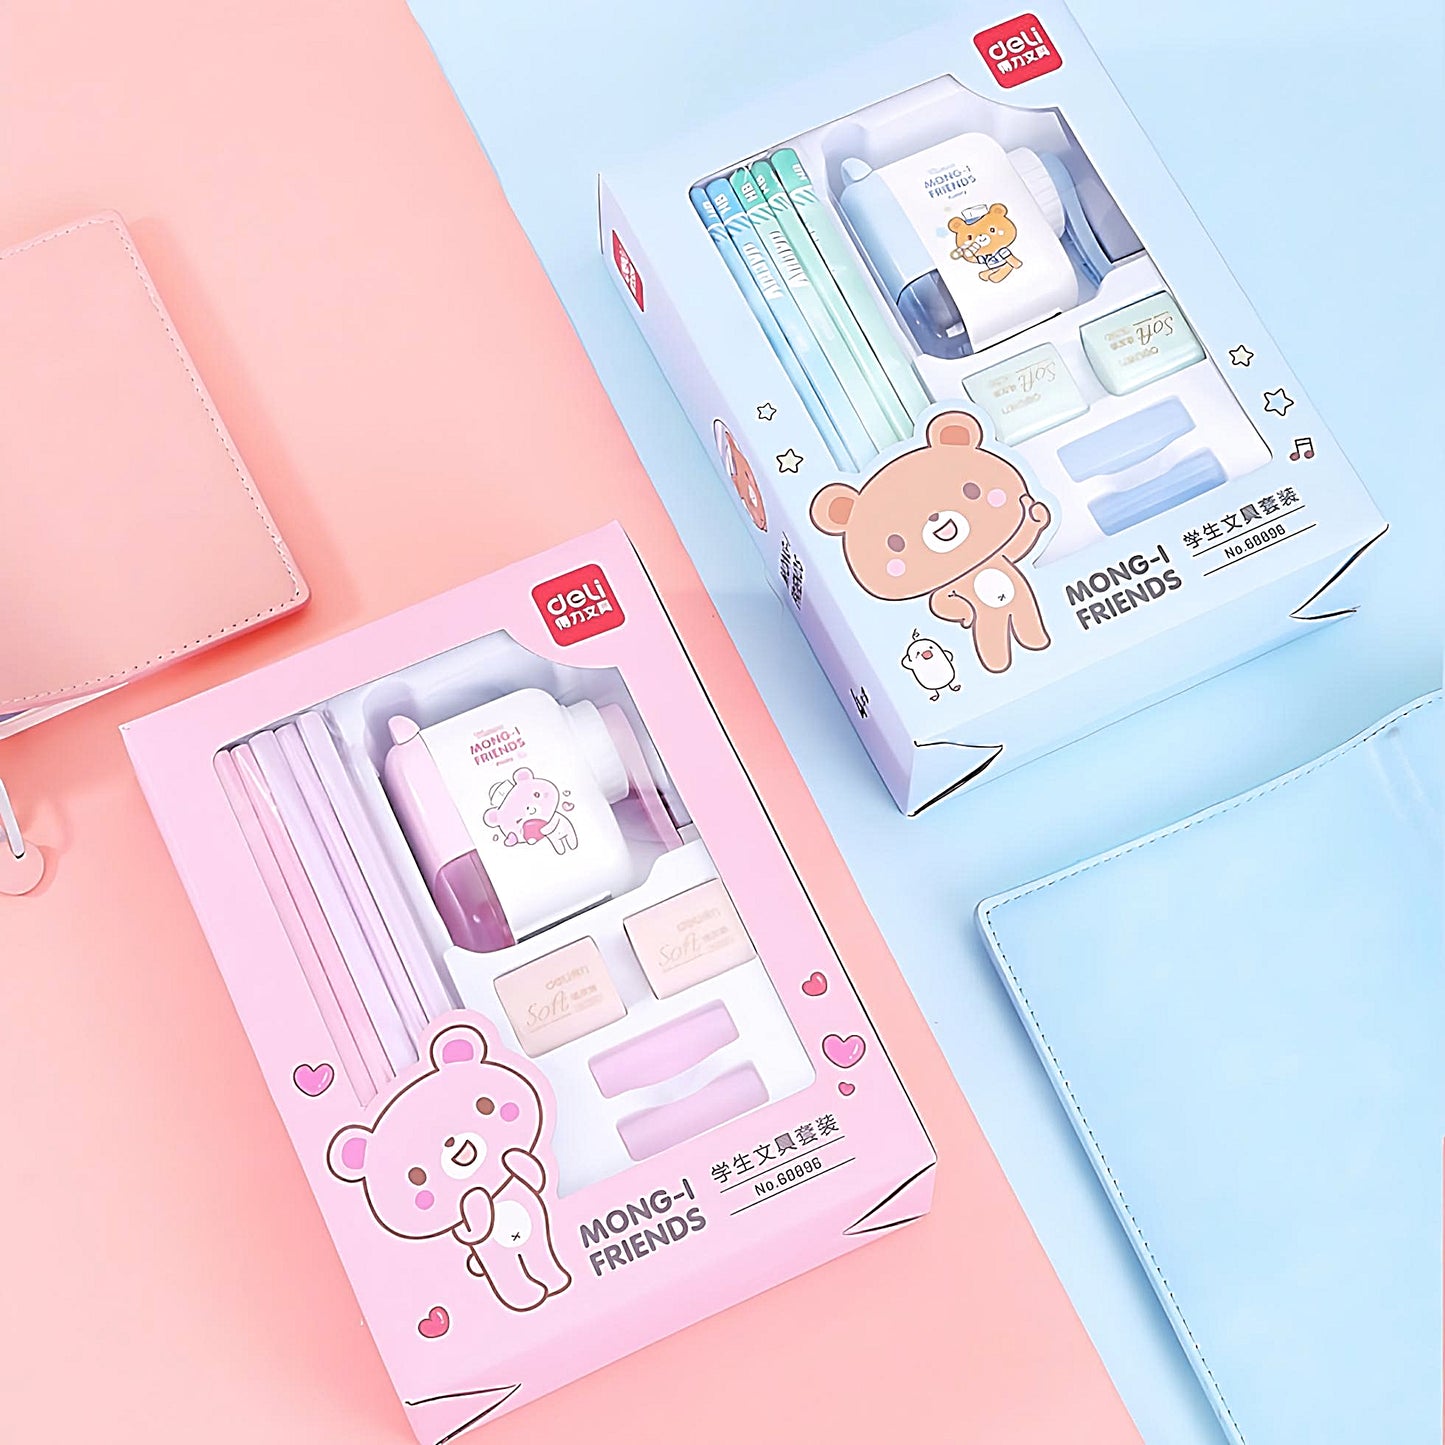 two Kawaii stationey sets in pink and blue colors